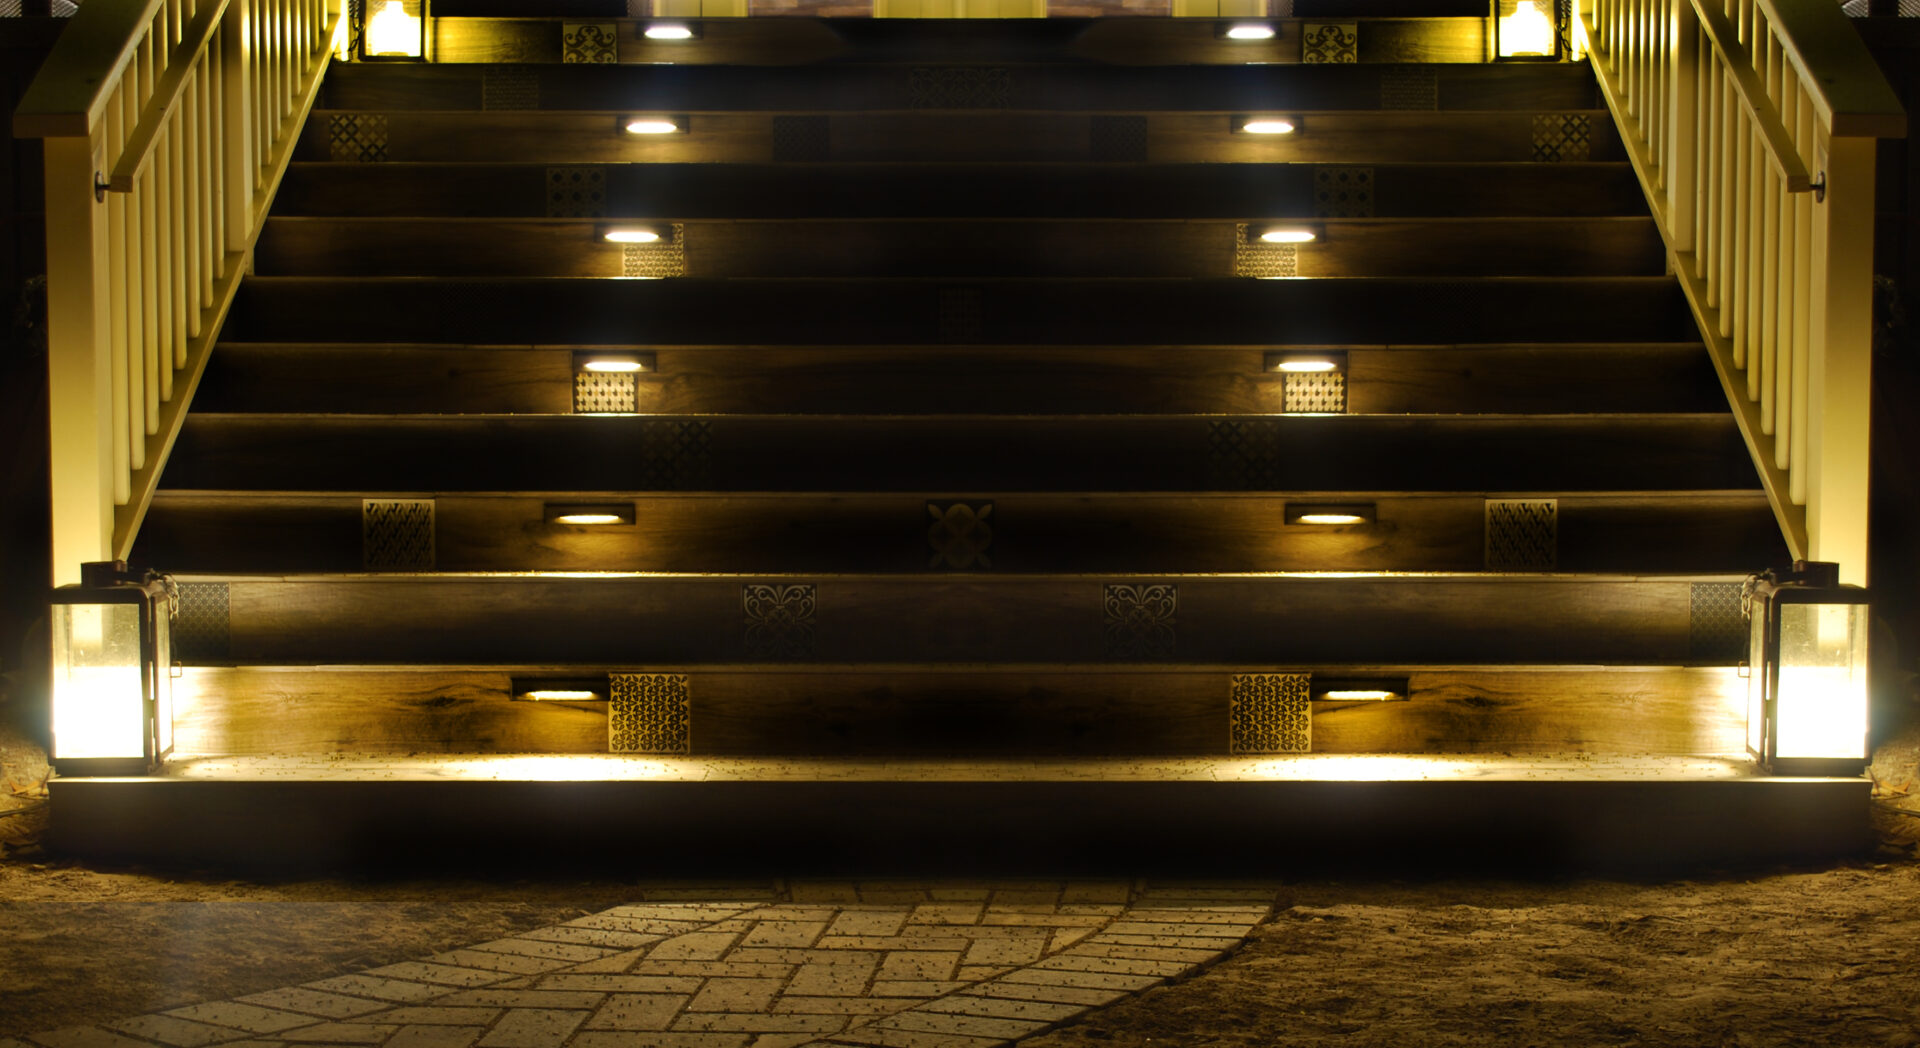 A picture of dim lights attached to the stairs